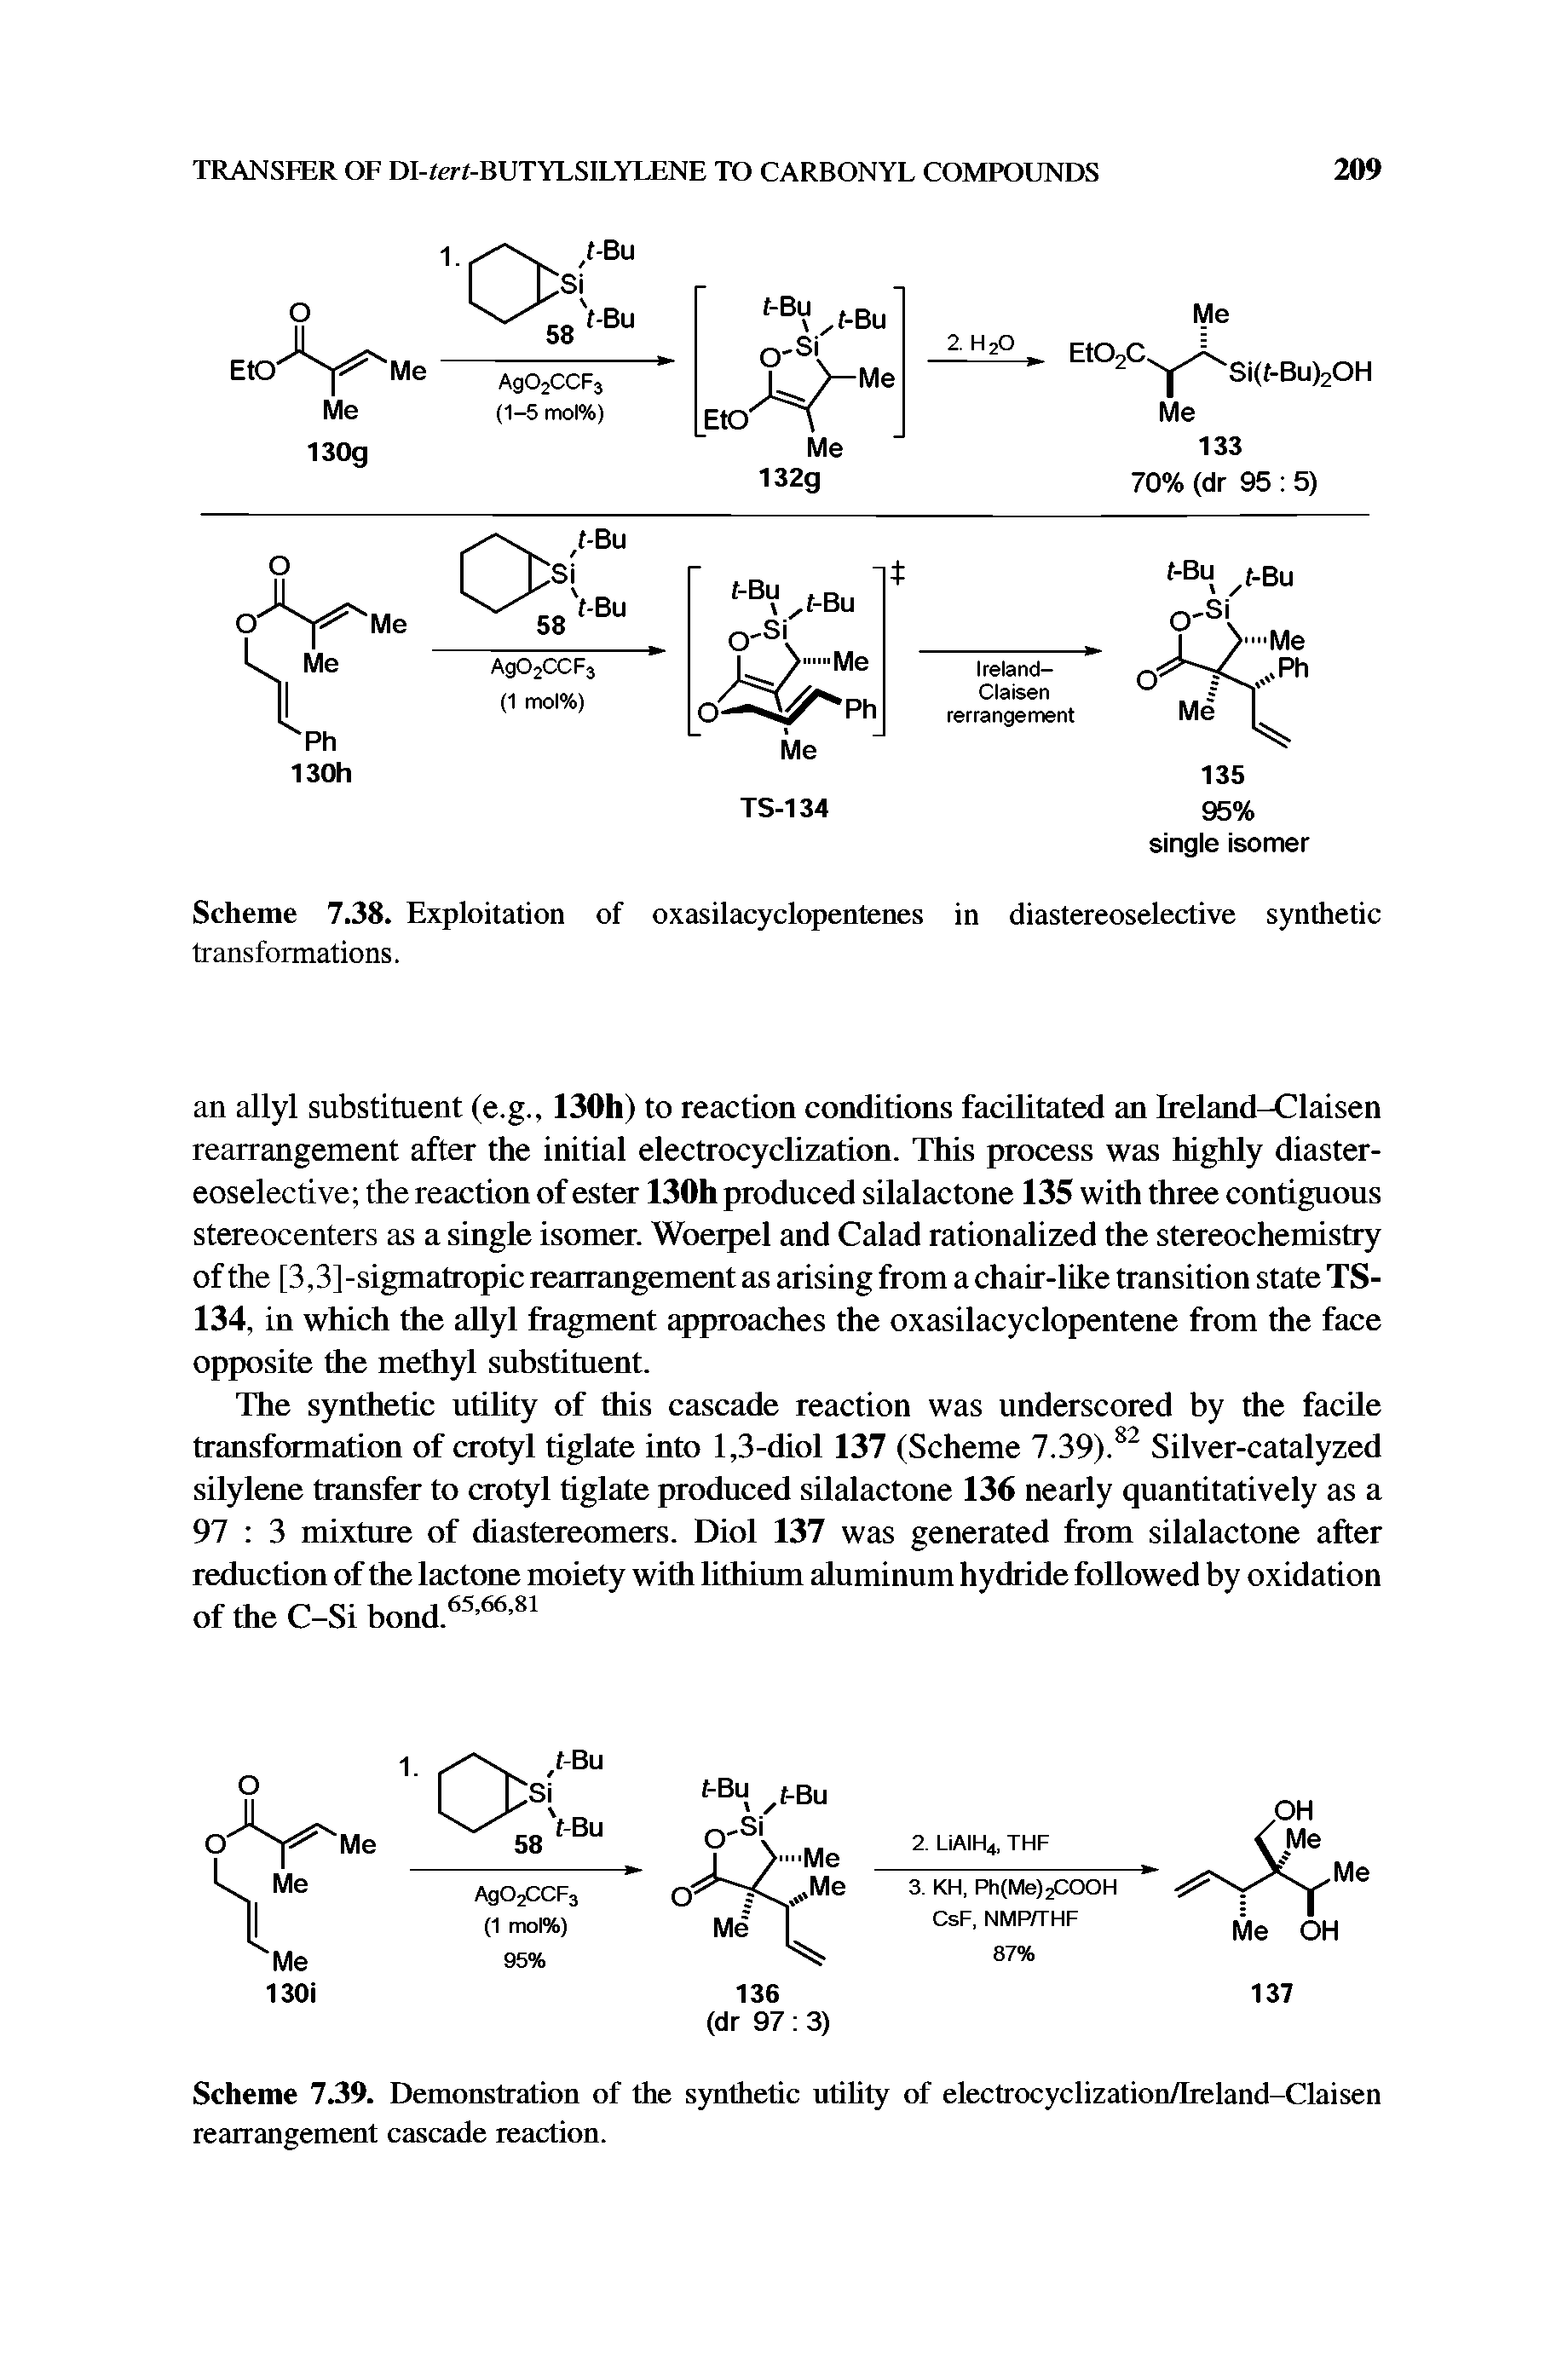 Scheme 7.39. Demonstration of the synthetic utility of electrocyclization/Ireland-Claisen rearrangement cascade reaction.